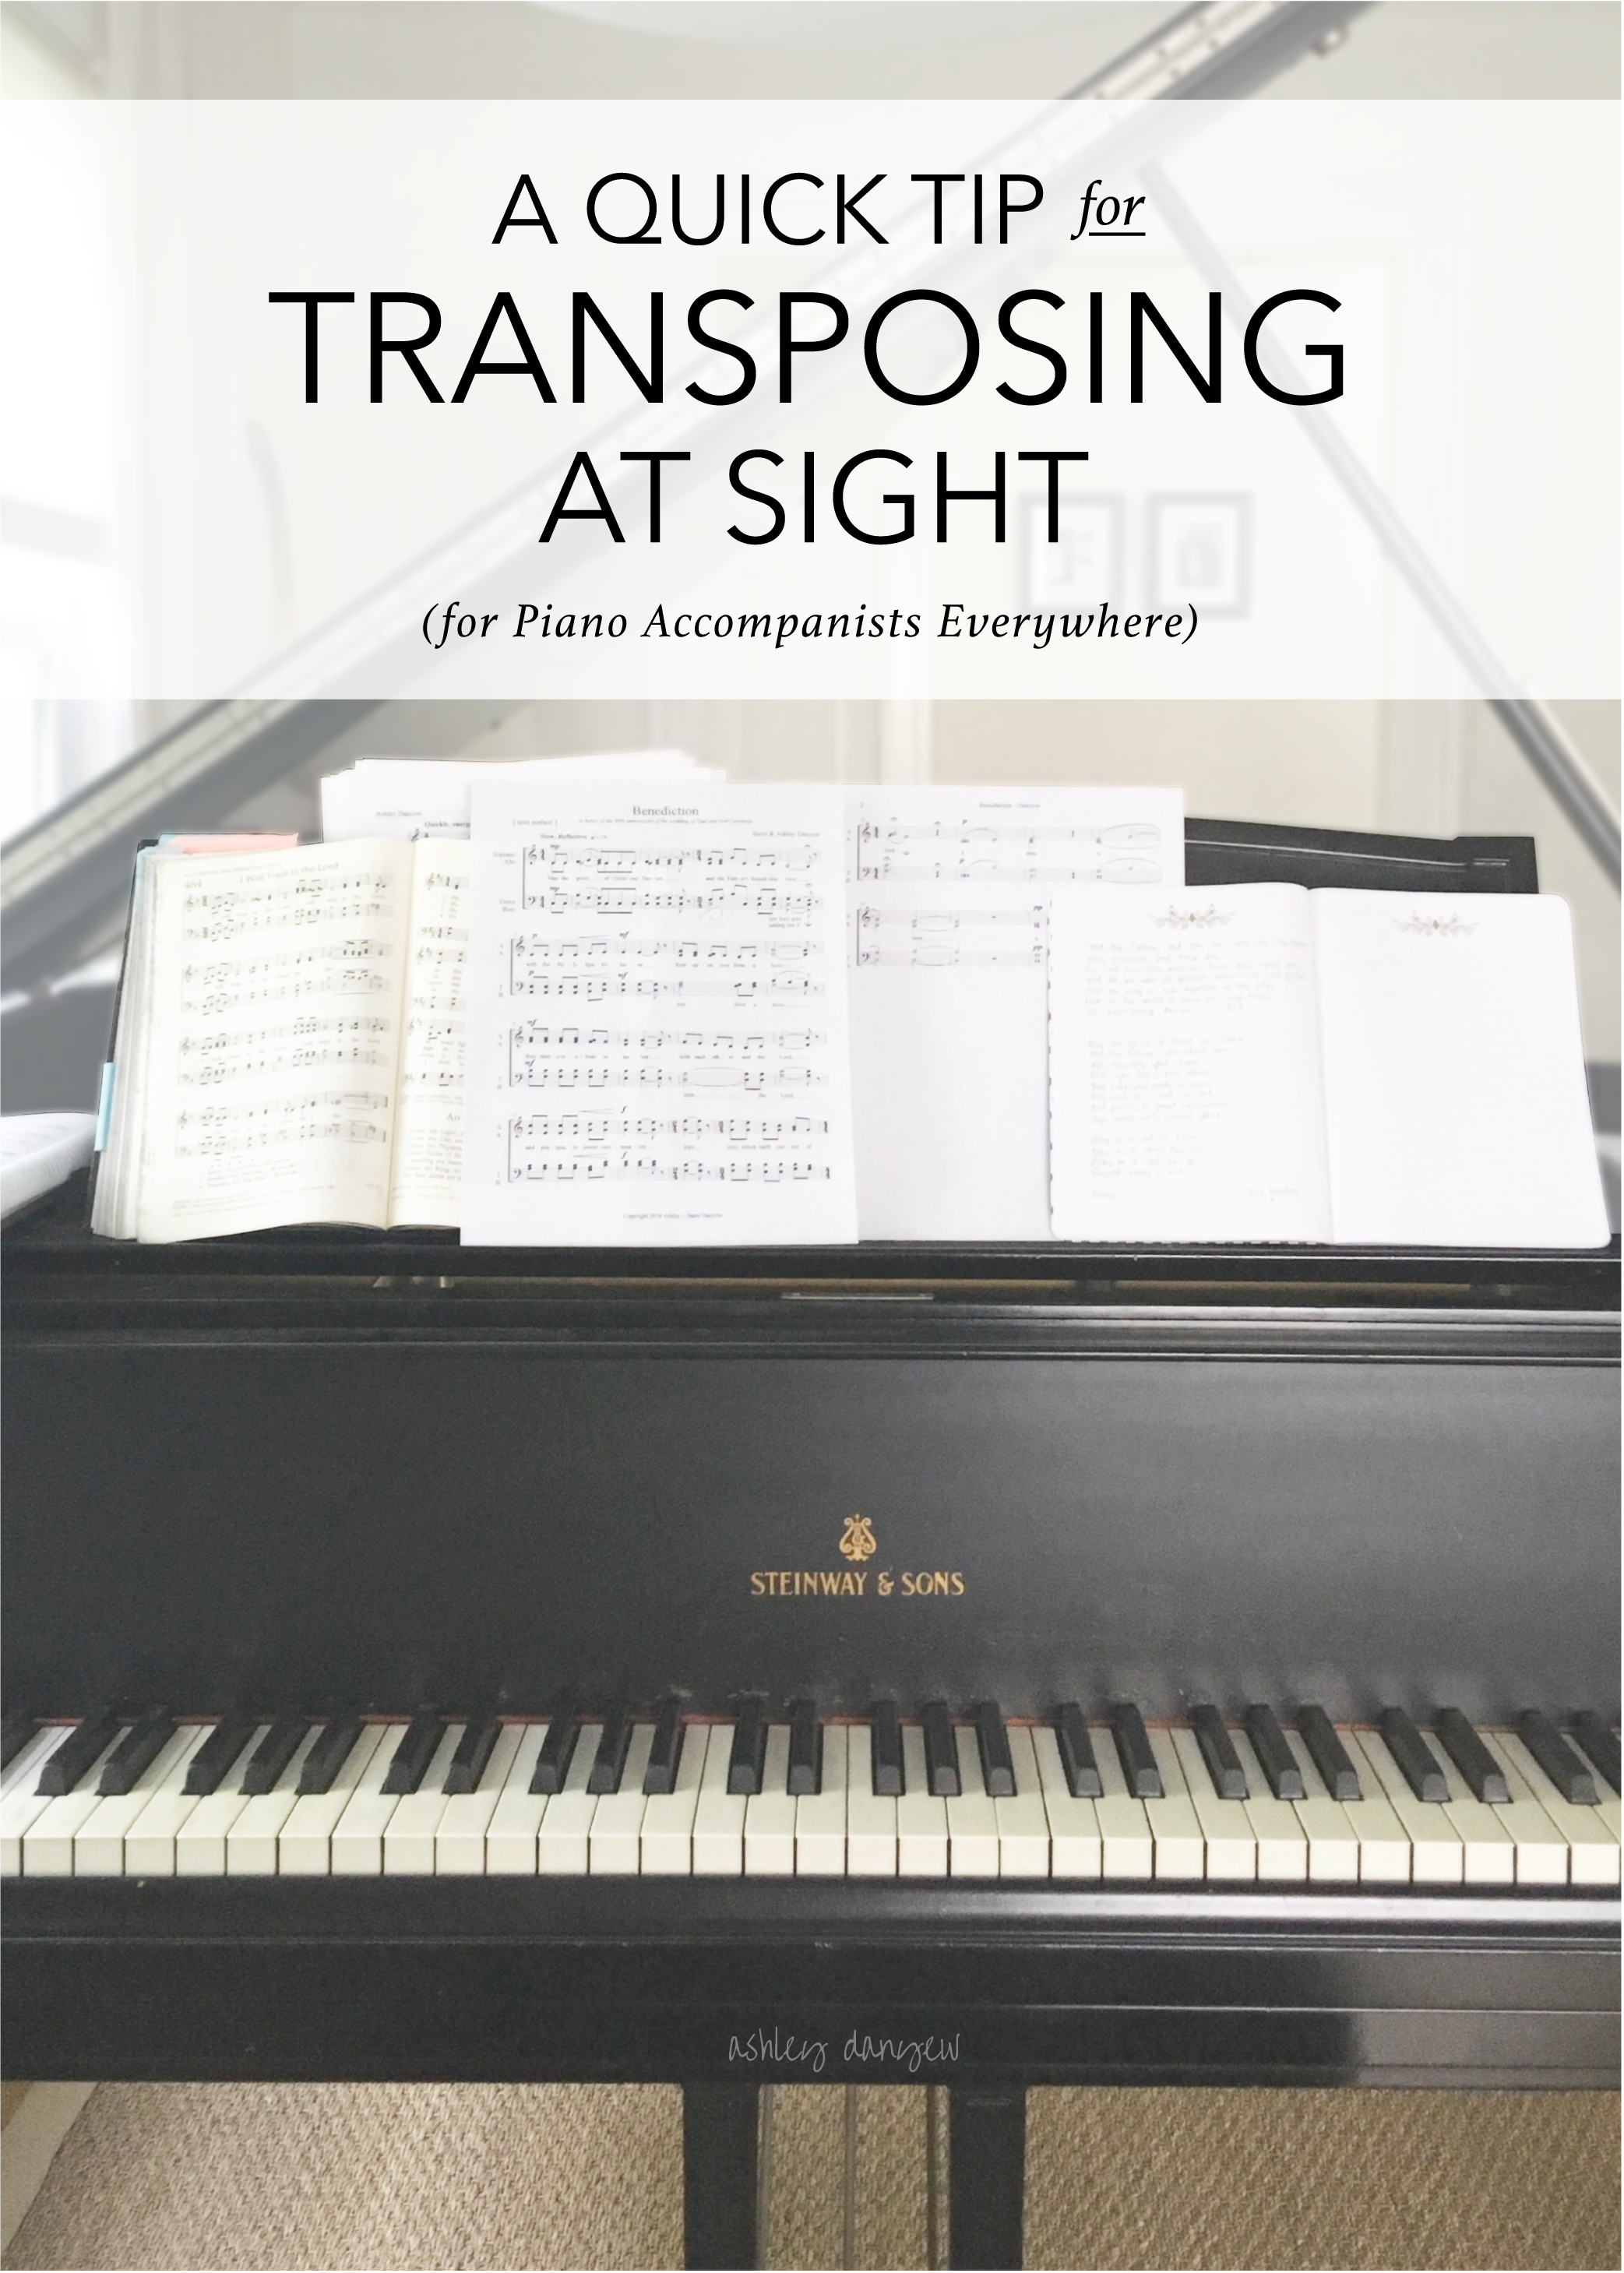 Copy of A Quick Tip for Transposing at Sight (for Piano Accompanists Everywhere)